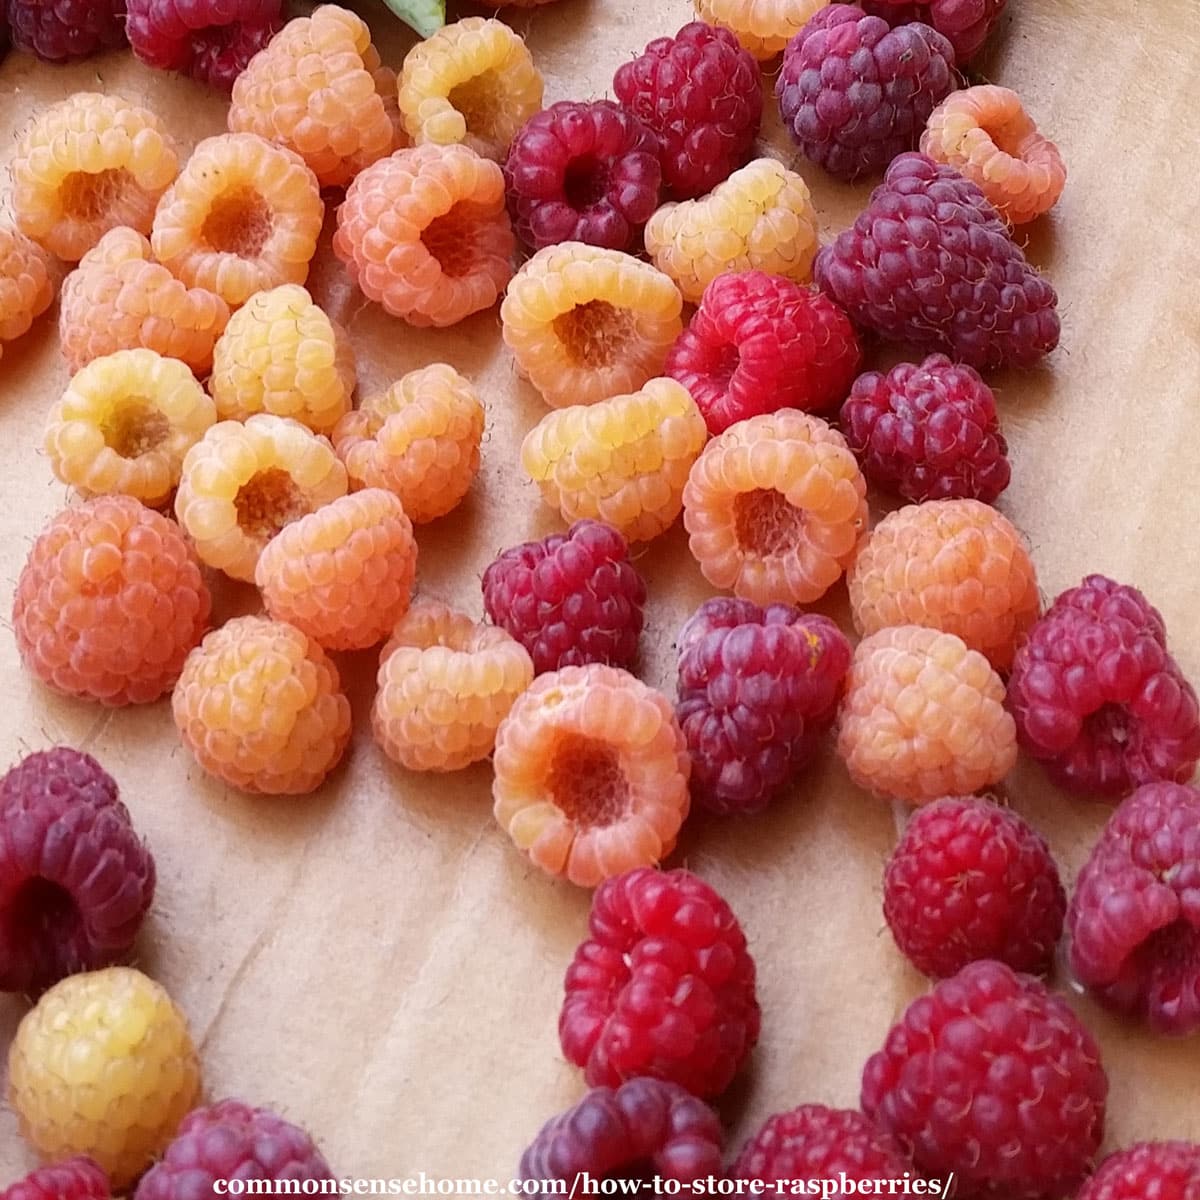 The Vinegar Solution For Perfectly Clean Raspberries